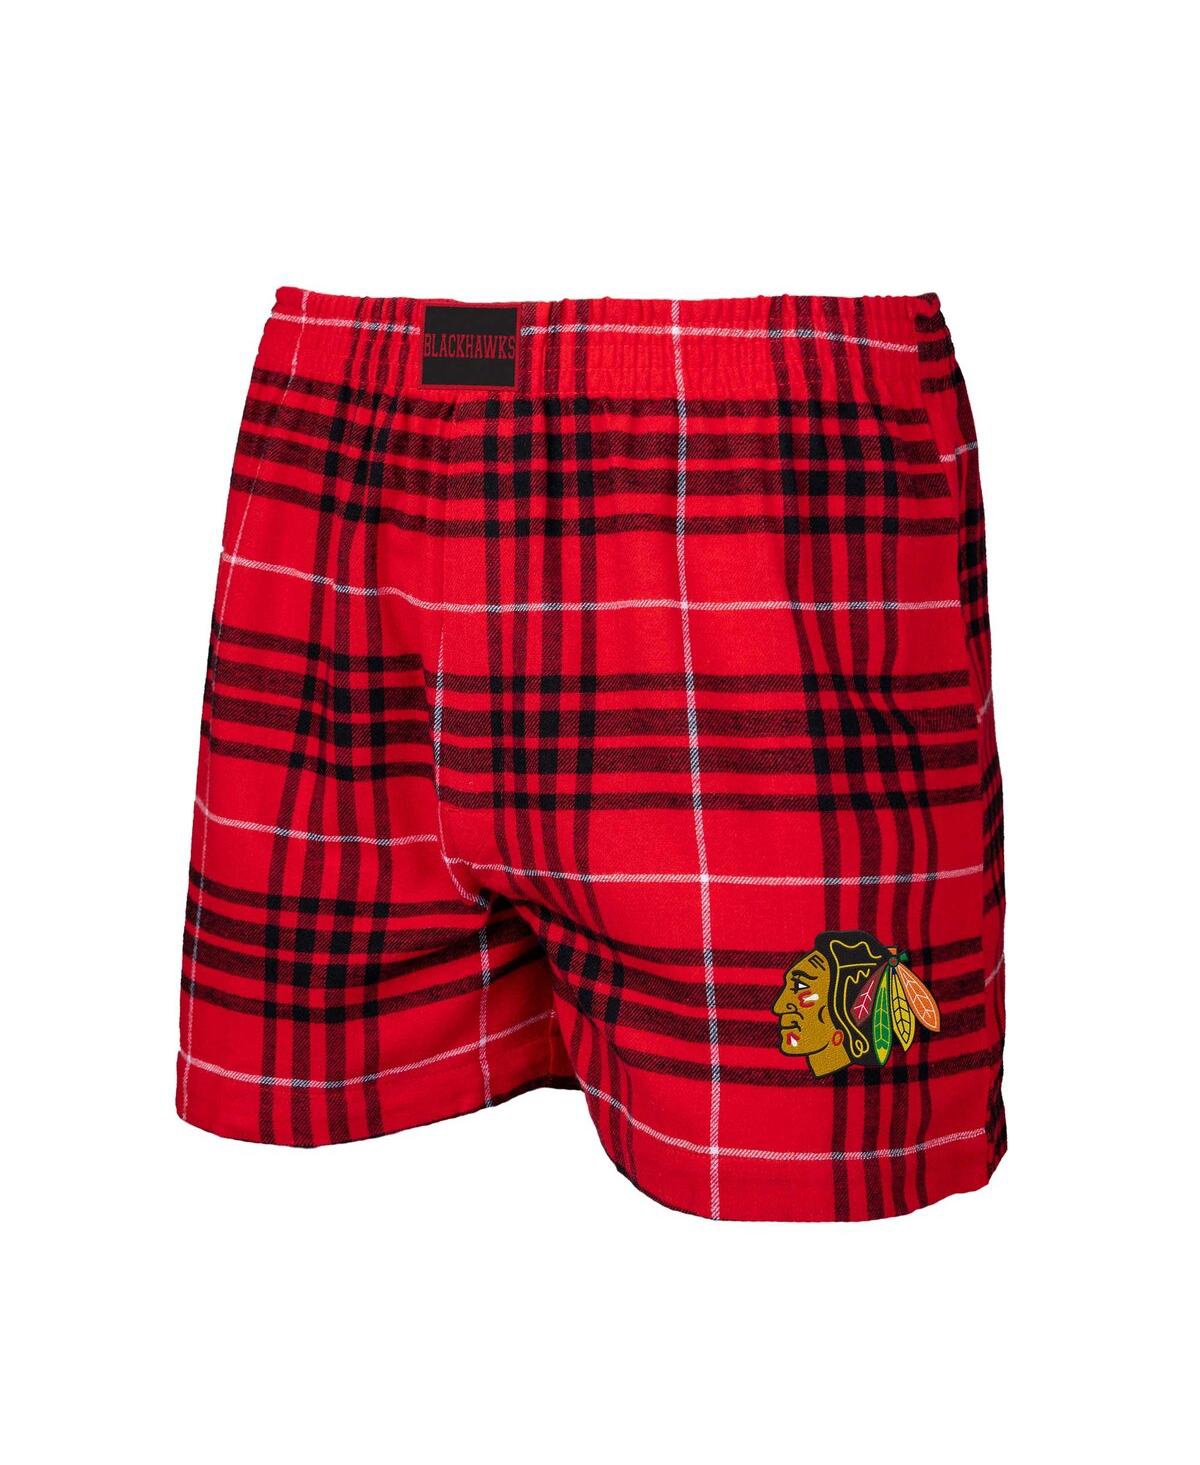 Men's Concepts Sport Red, Black Chicago Blackhawks Concord Flannel Boxers - Red, Black